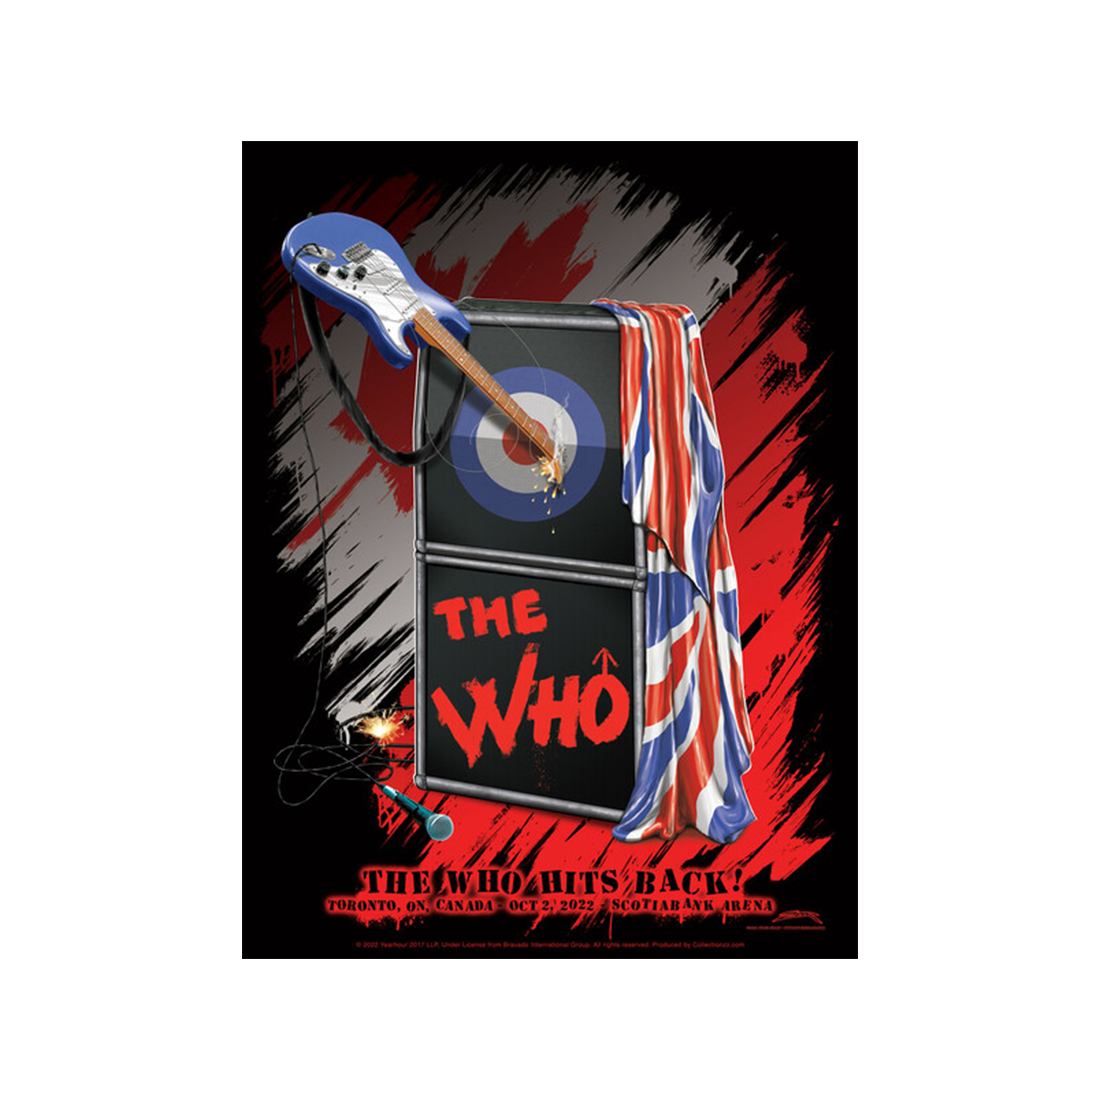 THE WHO HITS BACK! Toronto Tour Poster – The Who Official Store